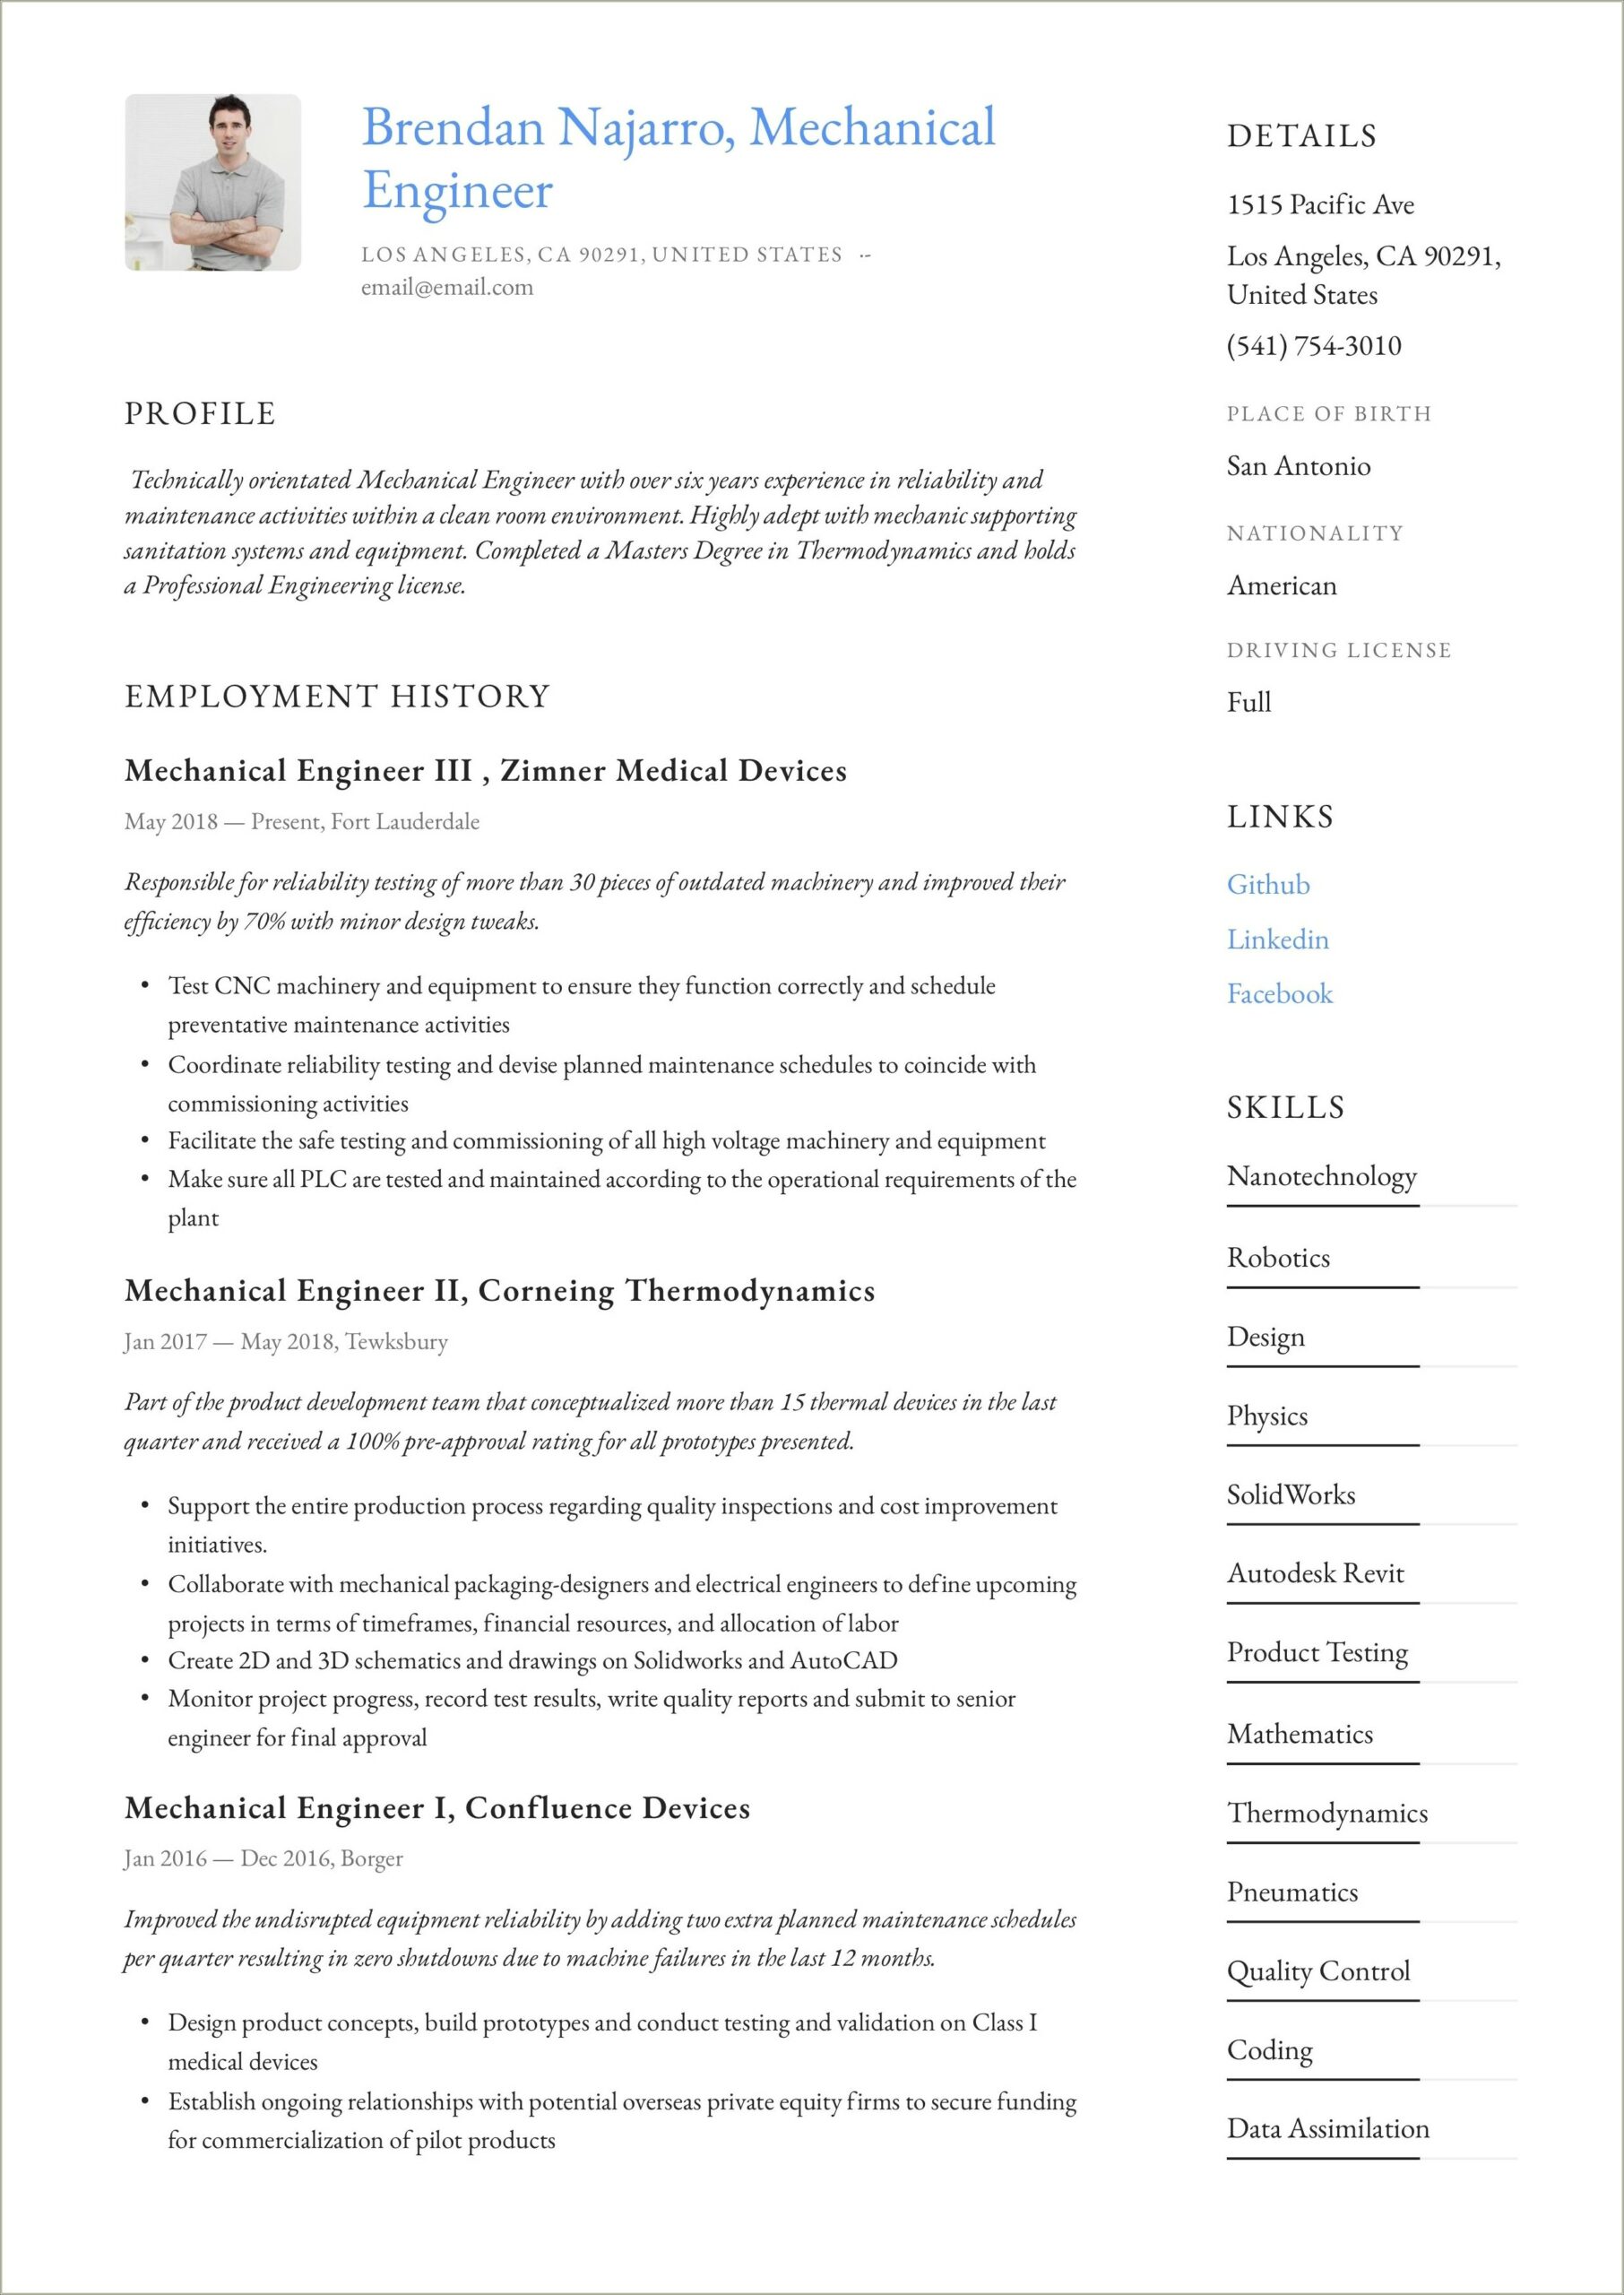 Resume For Mechanical Engineer Without Experience